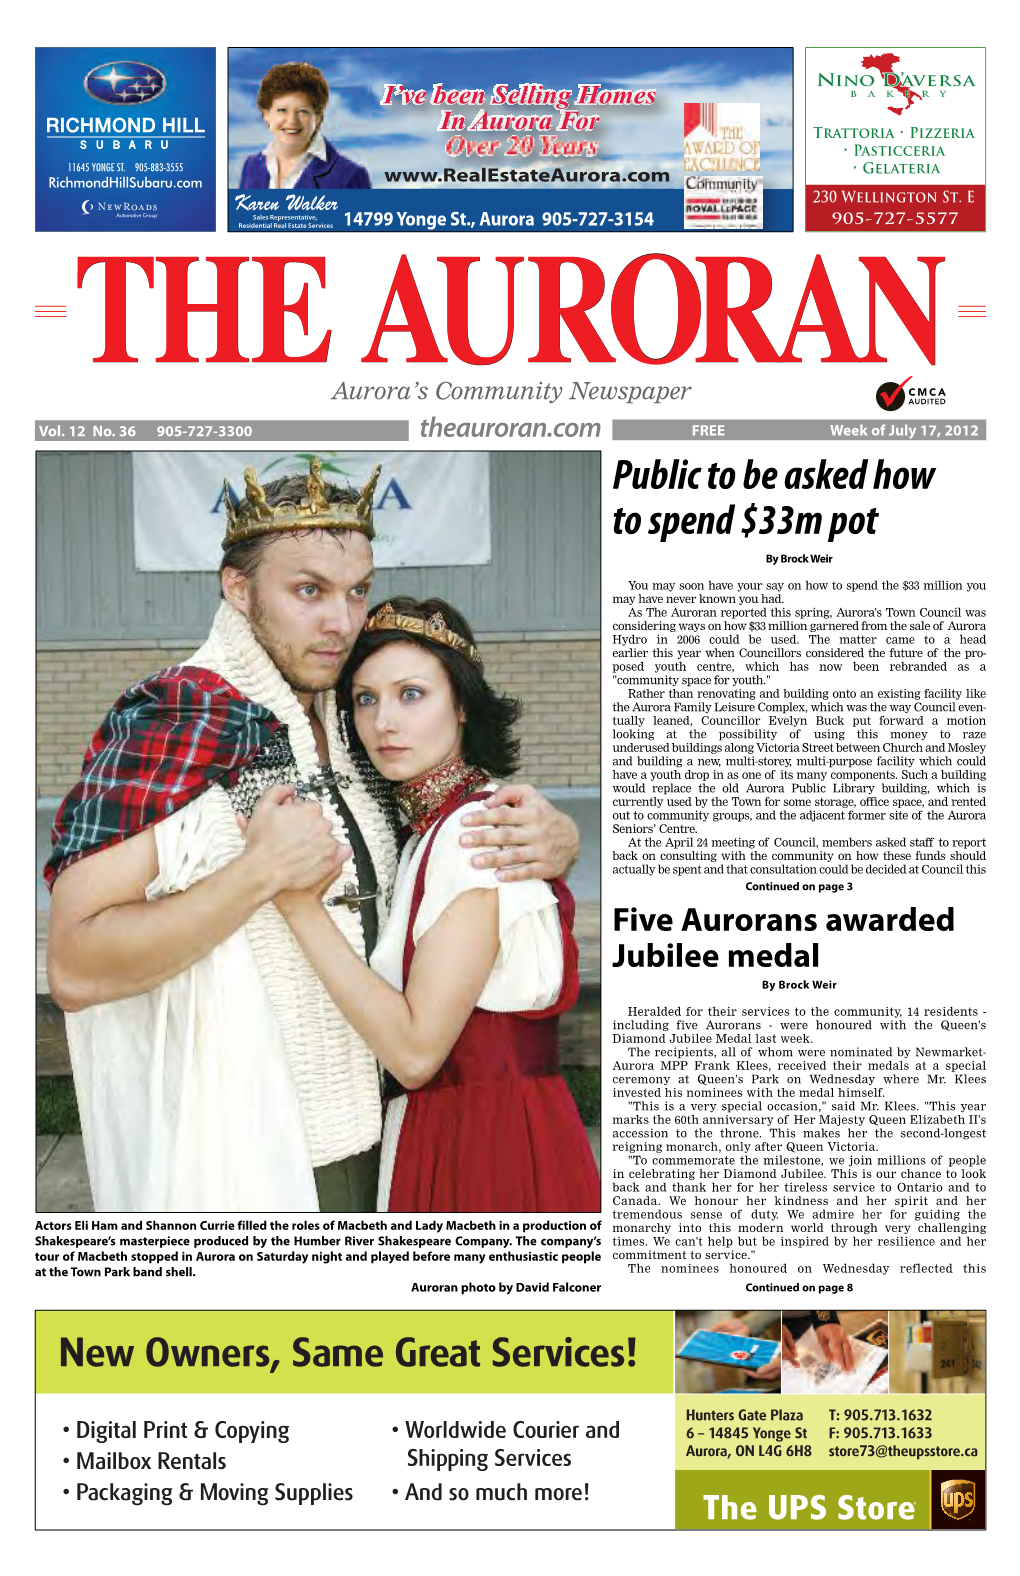 The Auroran Reported This Spring, Aurora's Town Council Was Considering Ways on How $33 Million Garnered from the Sale of Aurora Hydro in 2006 Could Be Used